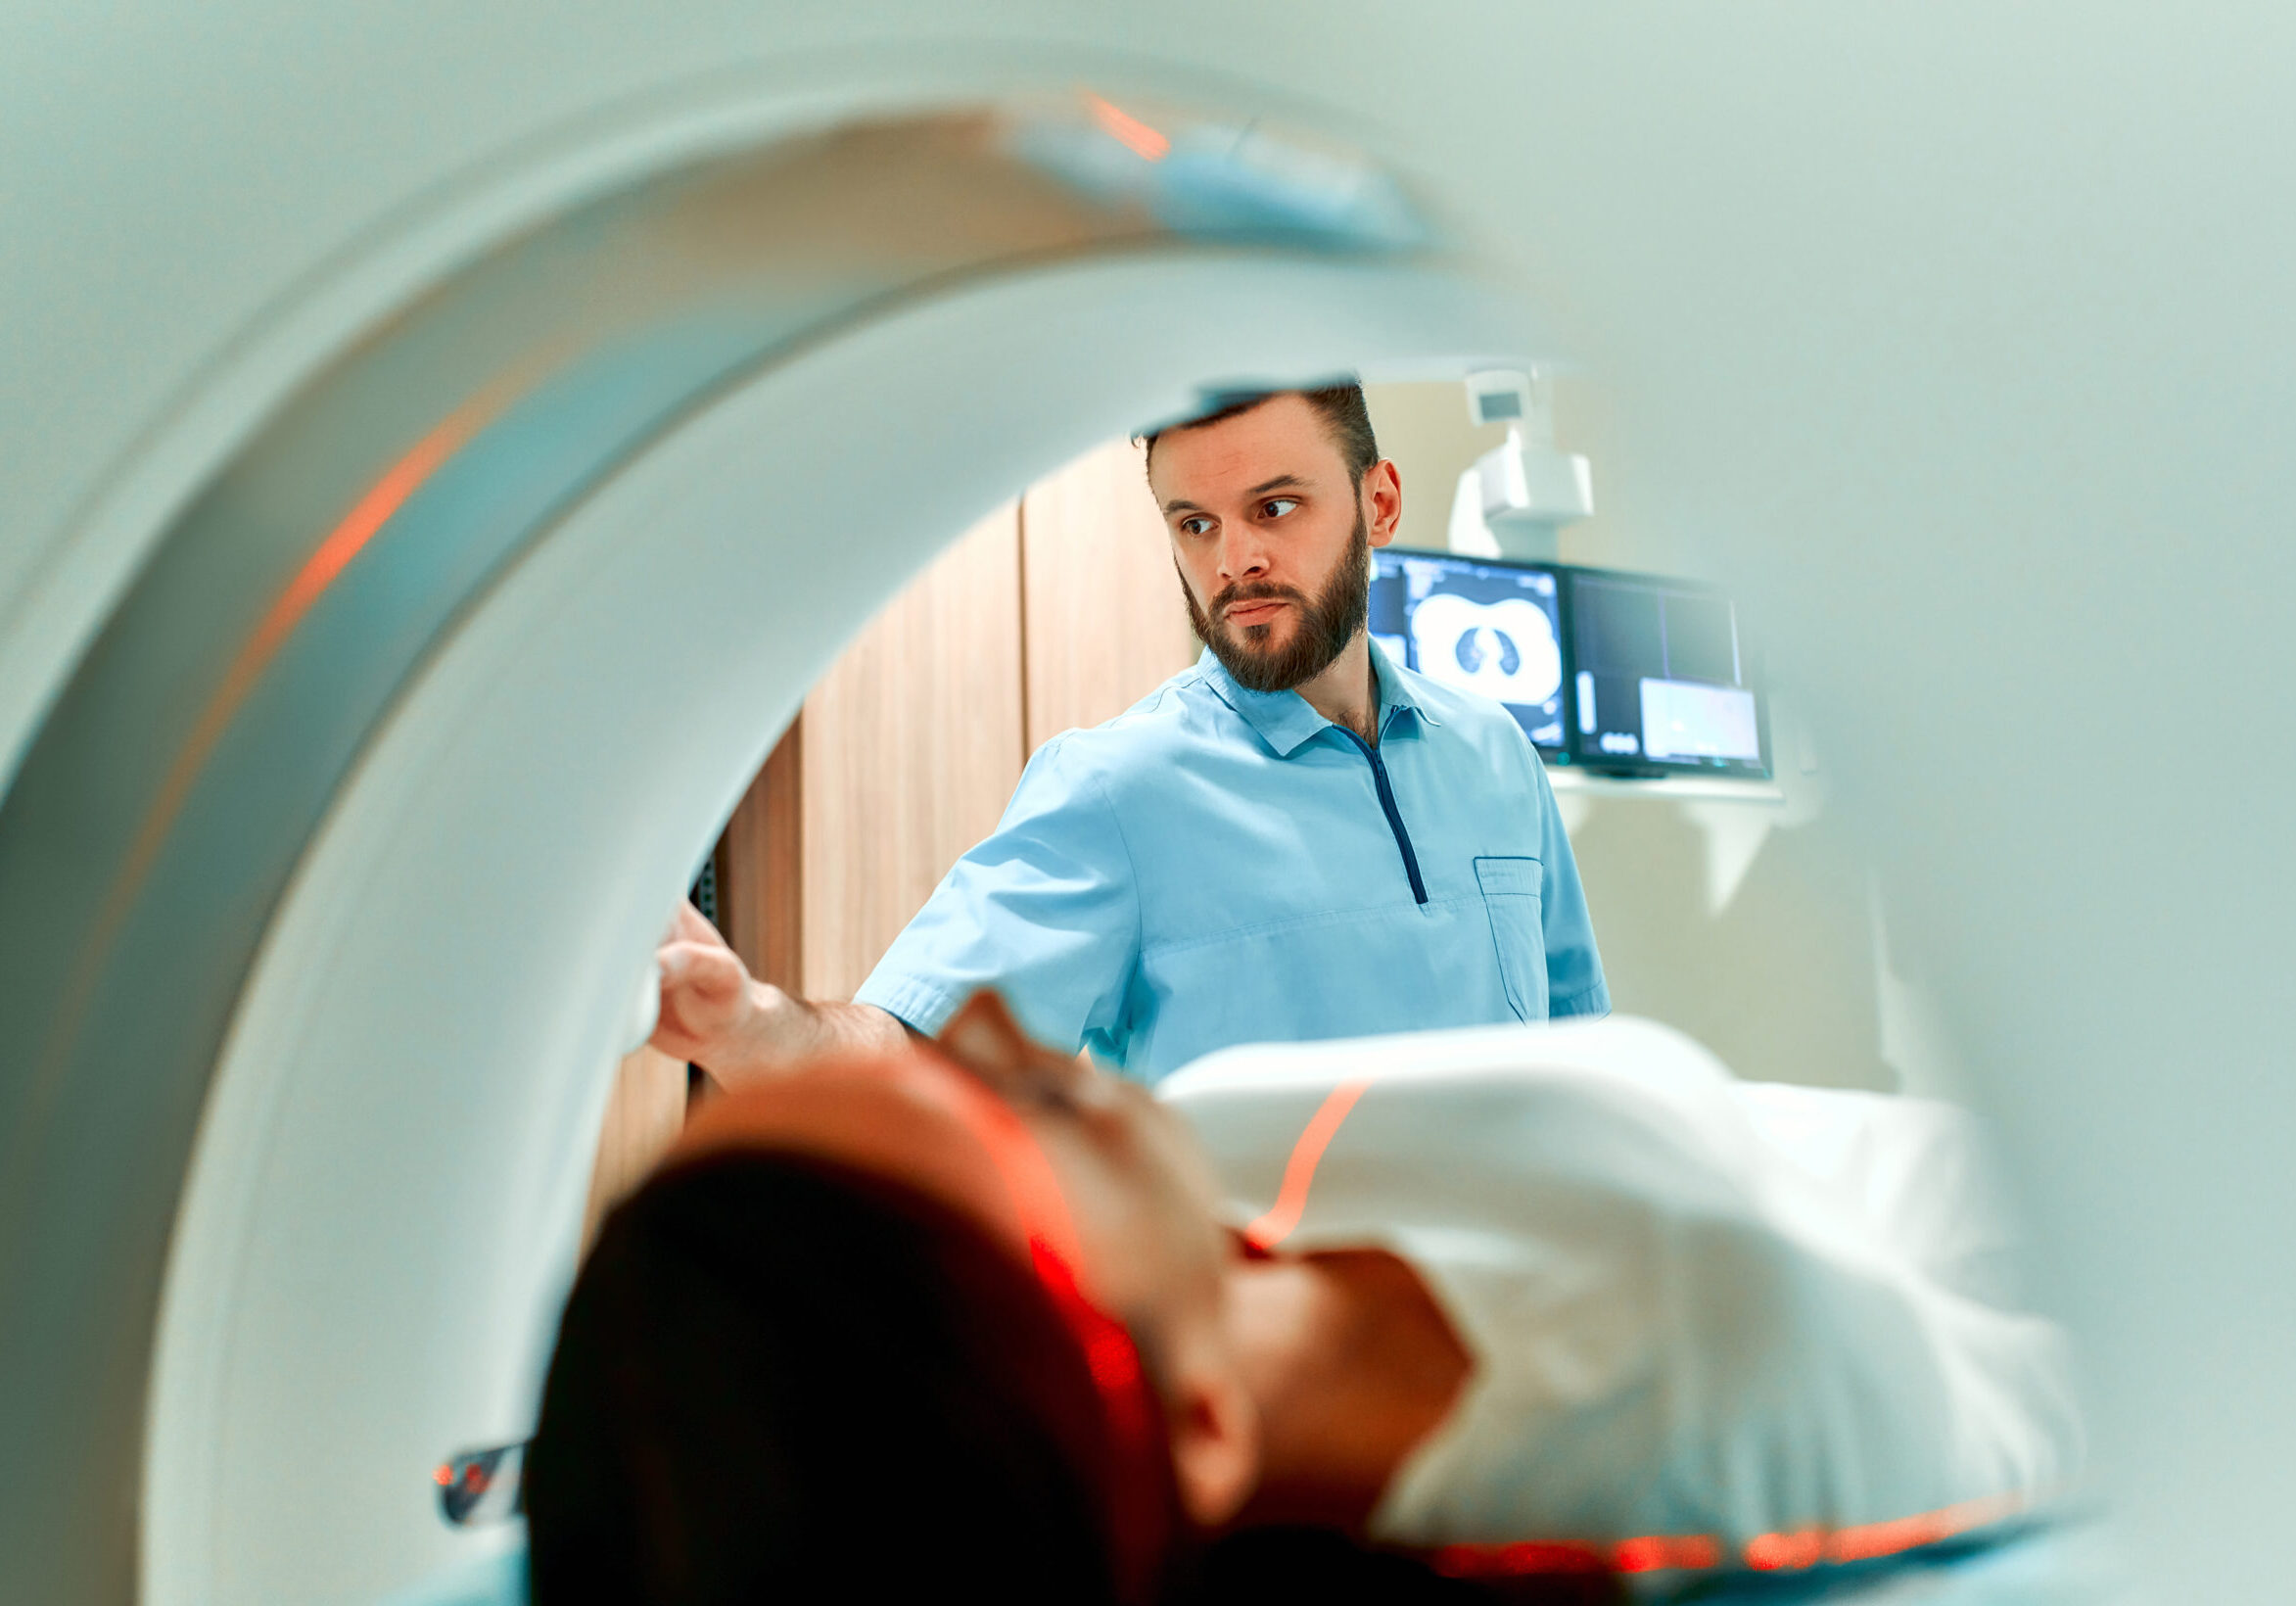 A patient lying on CT or MRI, the bed moves inside the machine, scanning her body and brain under the supervision of a doctor and a radiologist. In a medical laboratory with high-tech equipment.